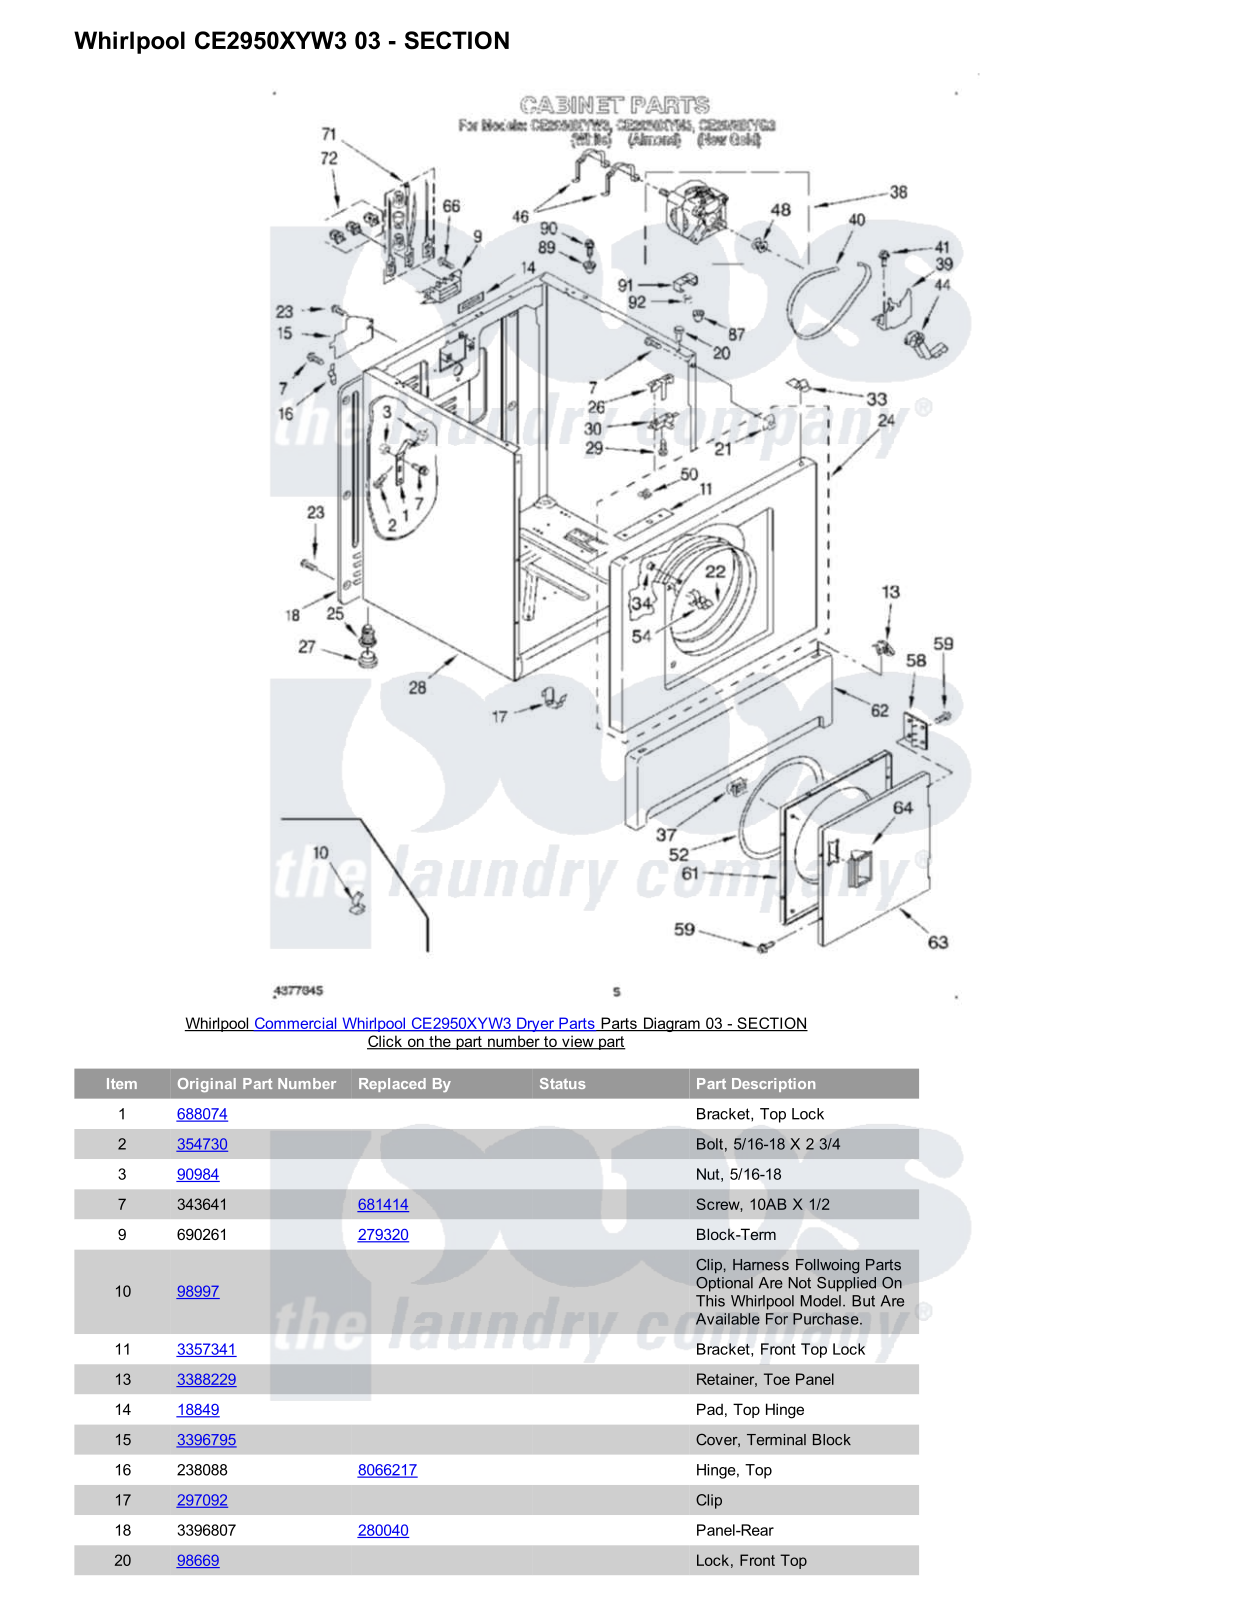 Whirlpool CE2950XYW3 Parts Diagram